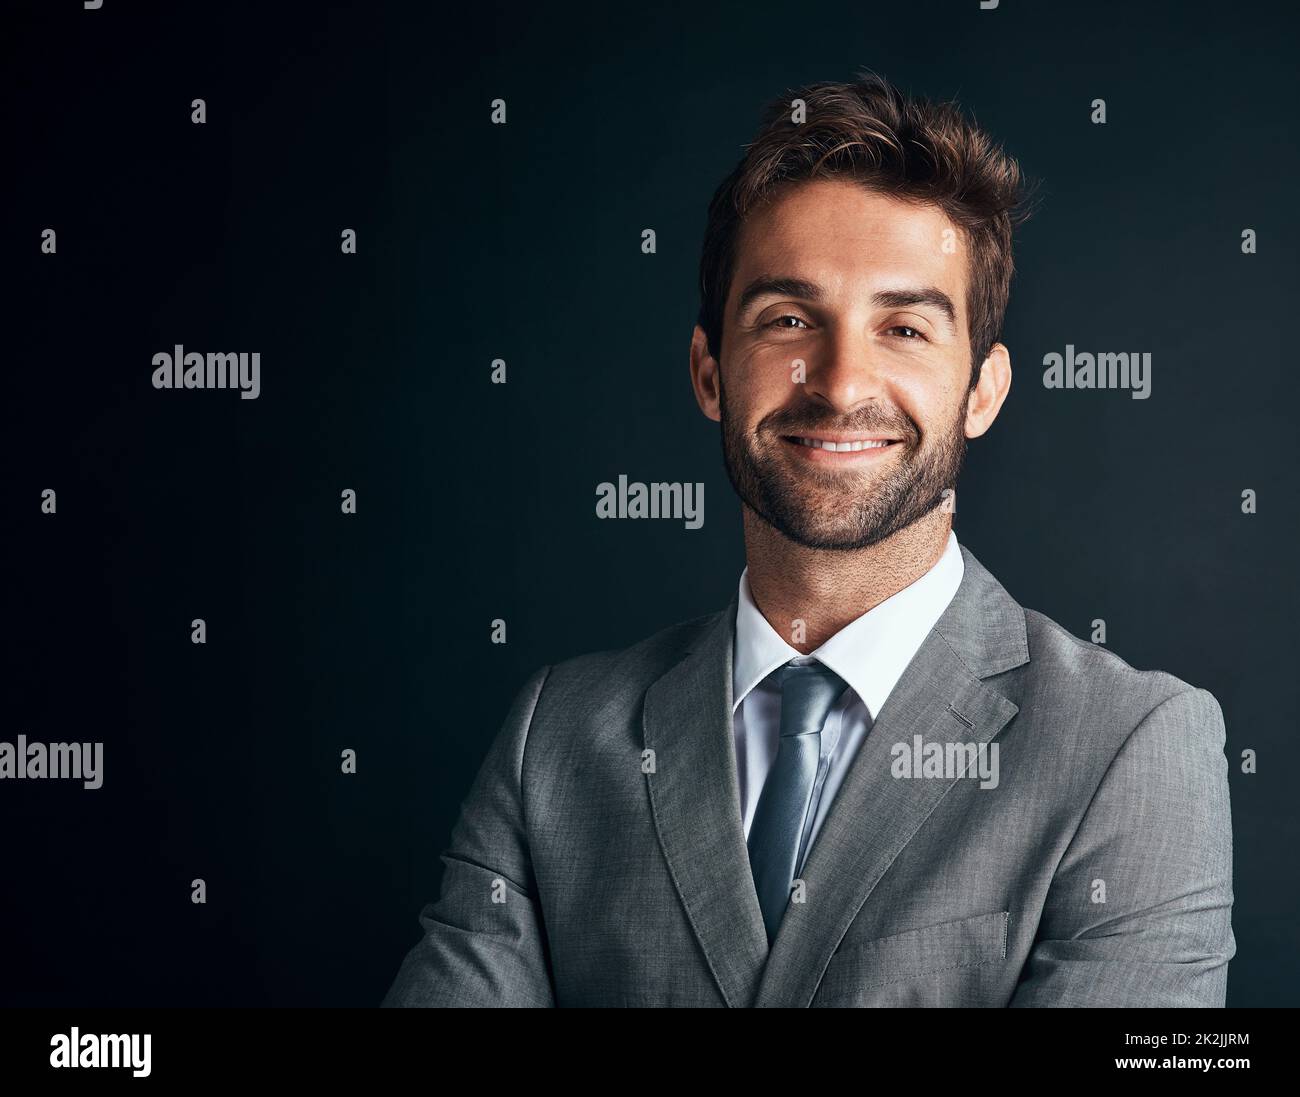 Im living proof of business success. Studio shot of a confident and stylishly dressed young businessman against a black background. Stock Photo